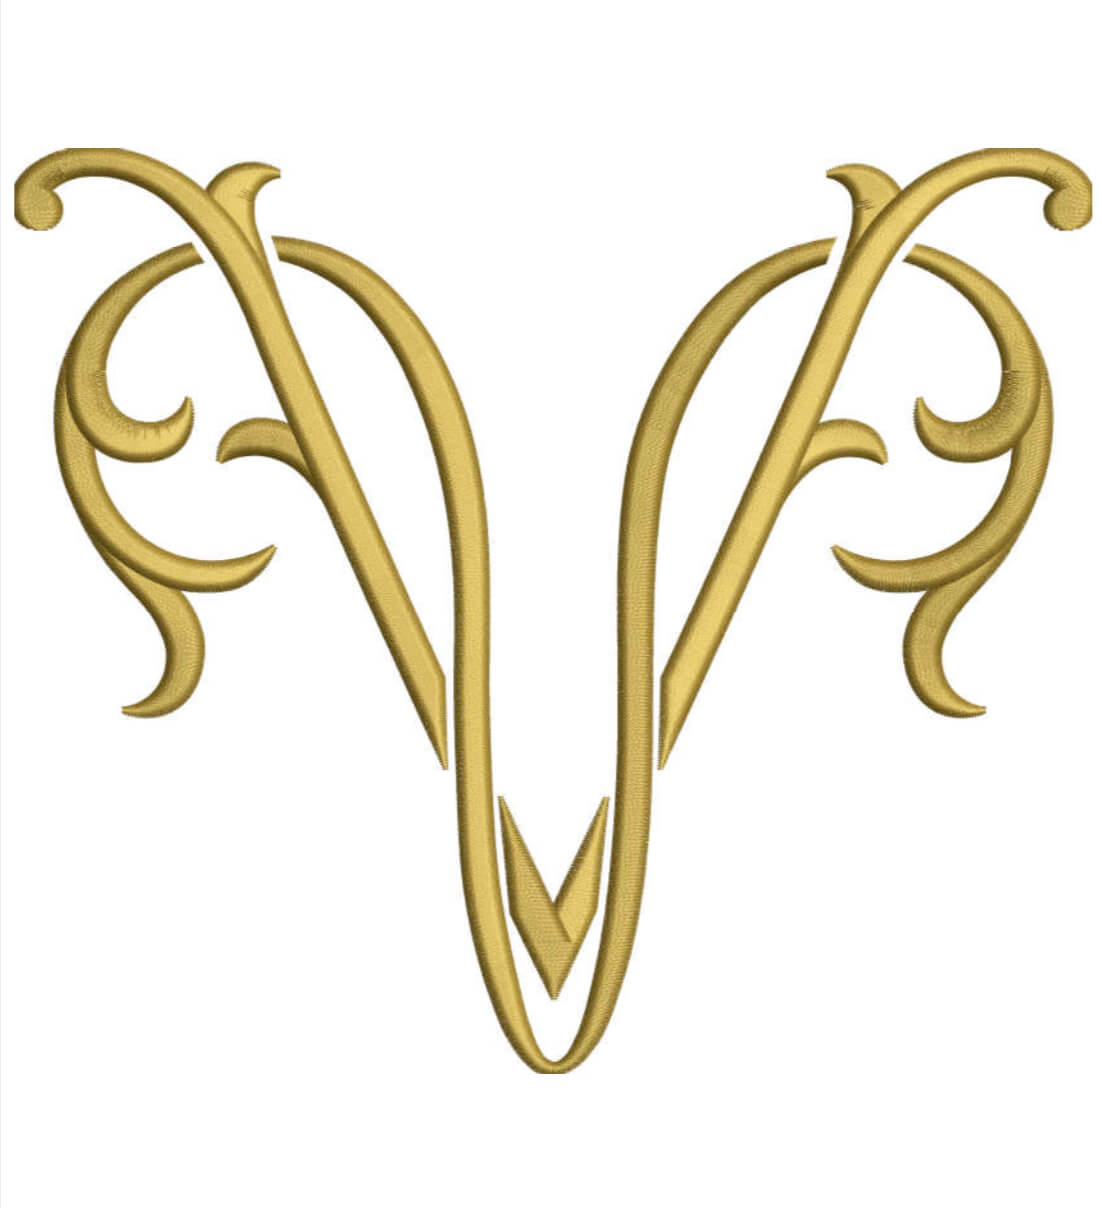 Monogram Couture VV for Embroidery